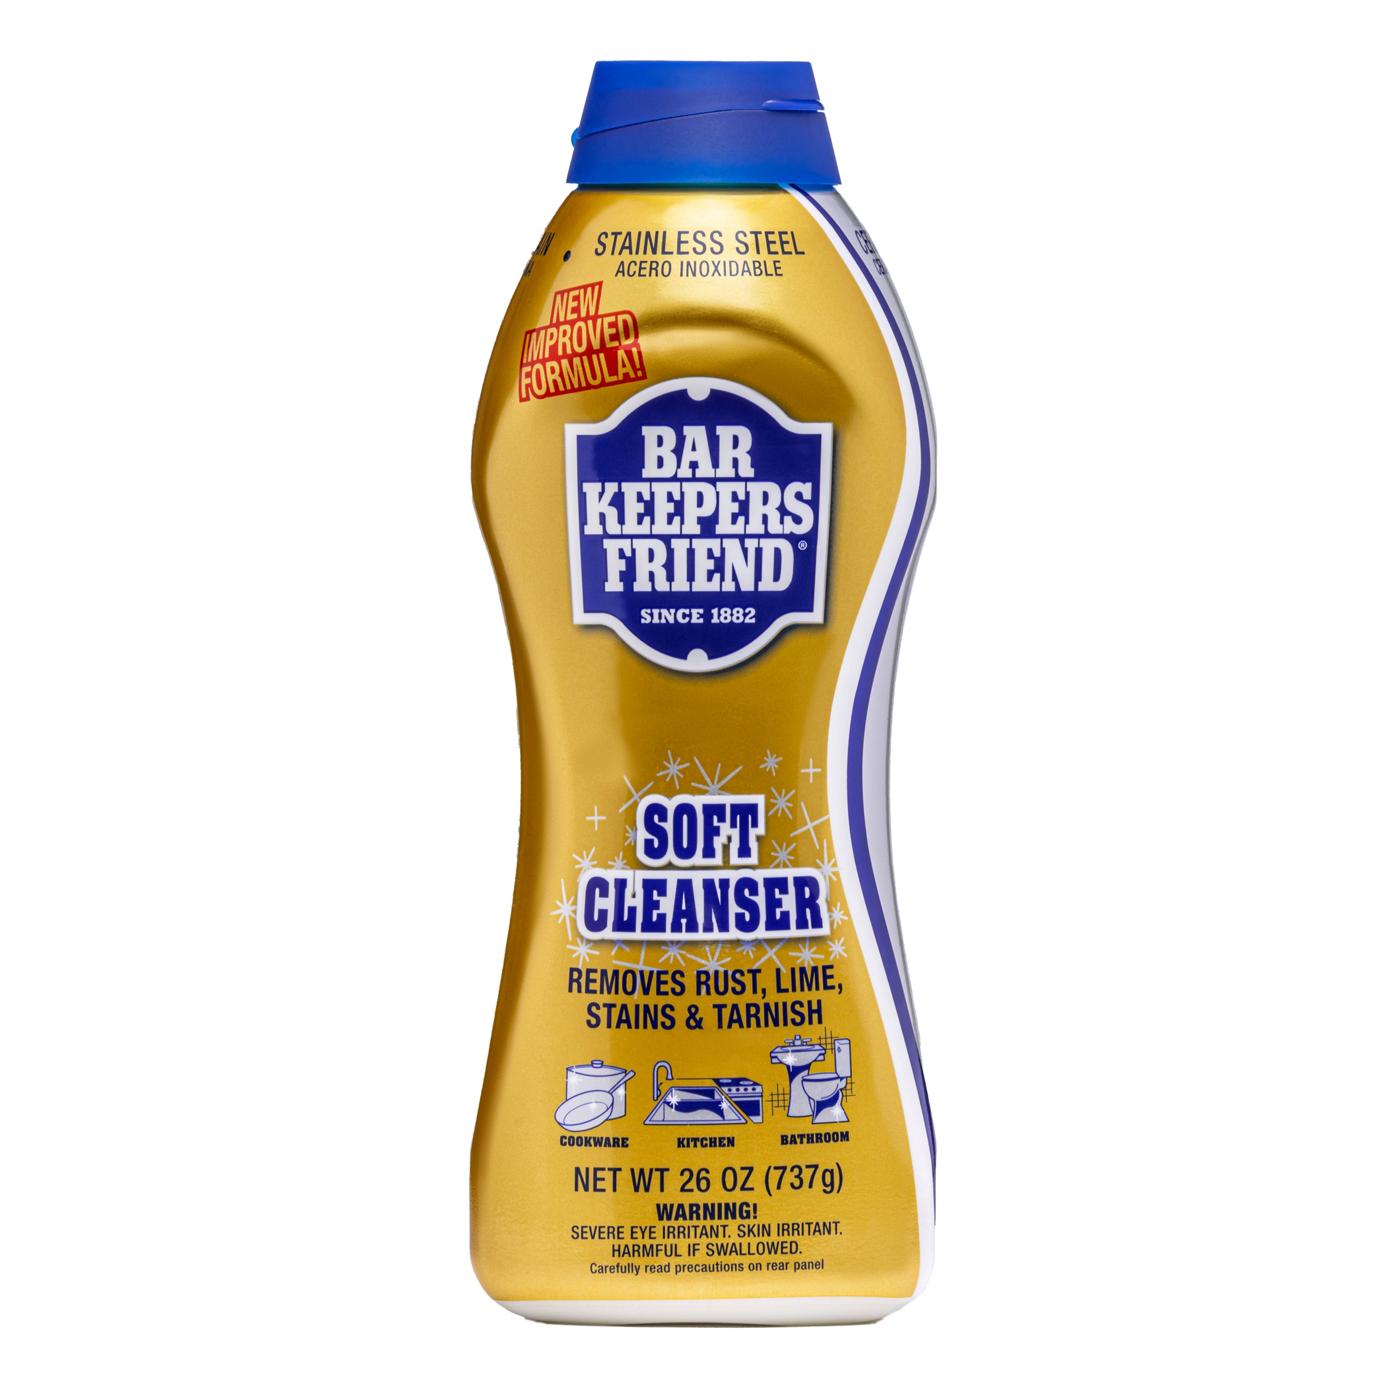 Bar Keepers Friend Soft Cleanser; image 1 of 4